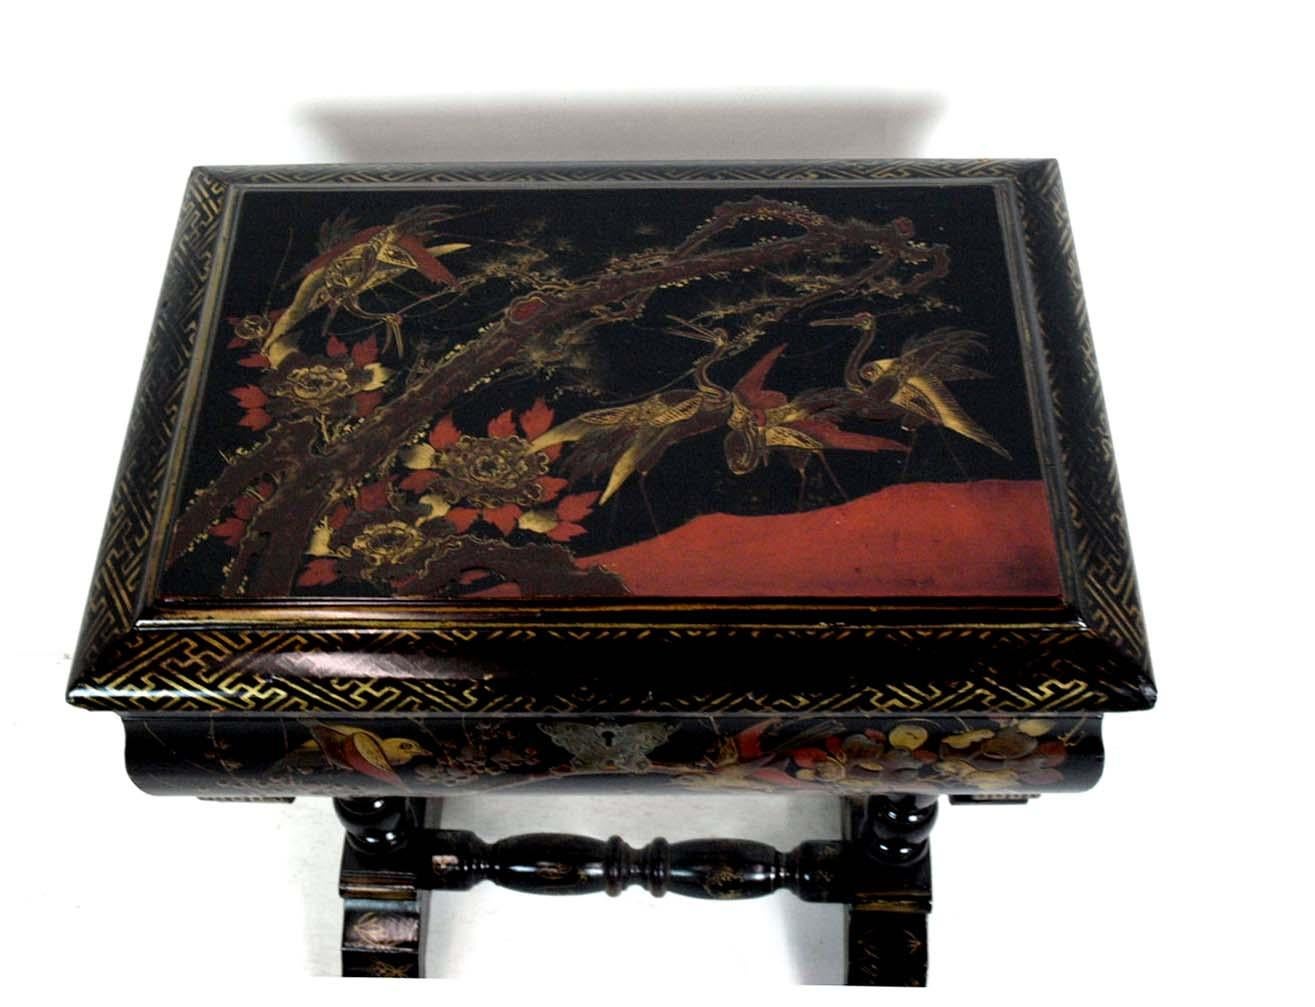 Japanese lacquer sewing table, the top and front decorated with words and flowers, the interior fitted with compartments and pin cushions, the box resting on two turned legs with connecting stretcher. Note the butterfly shaped escutcheon.